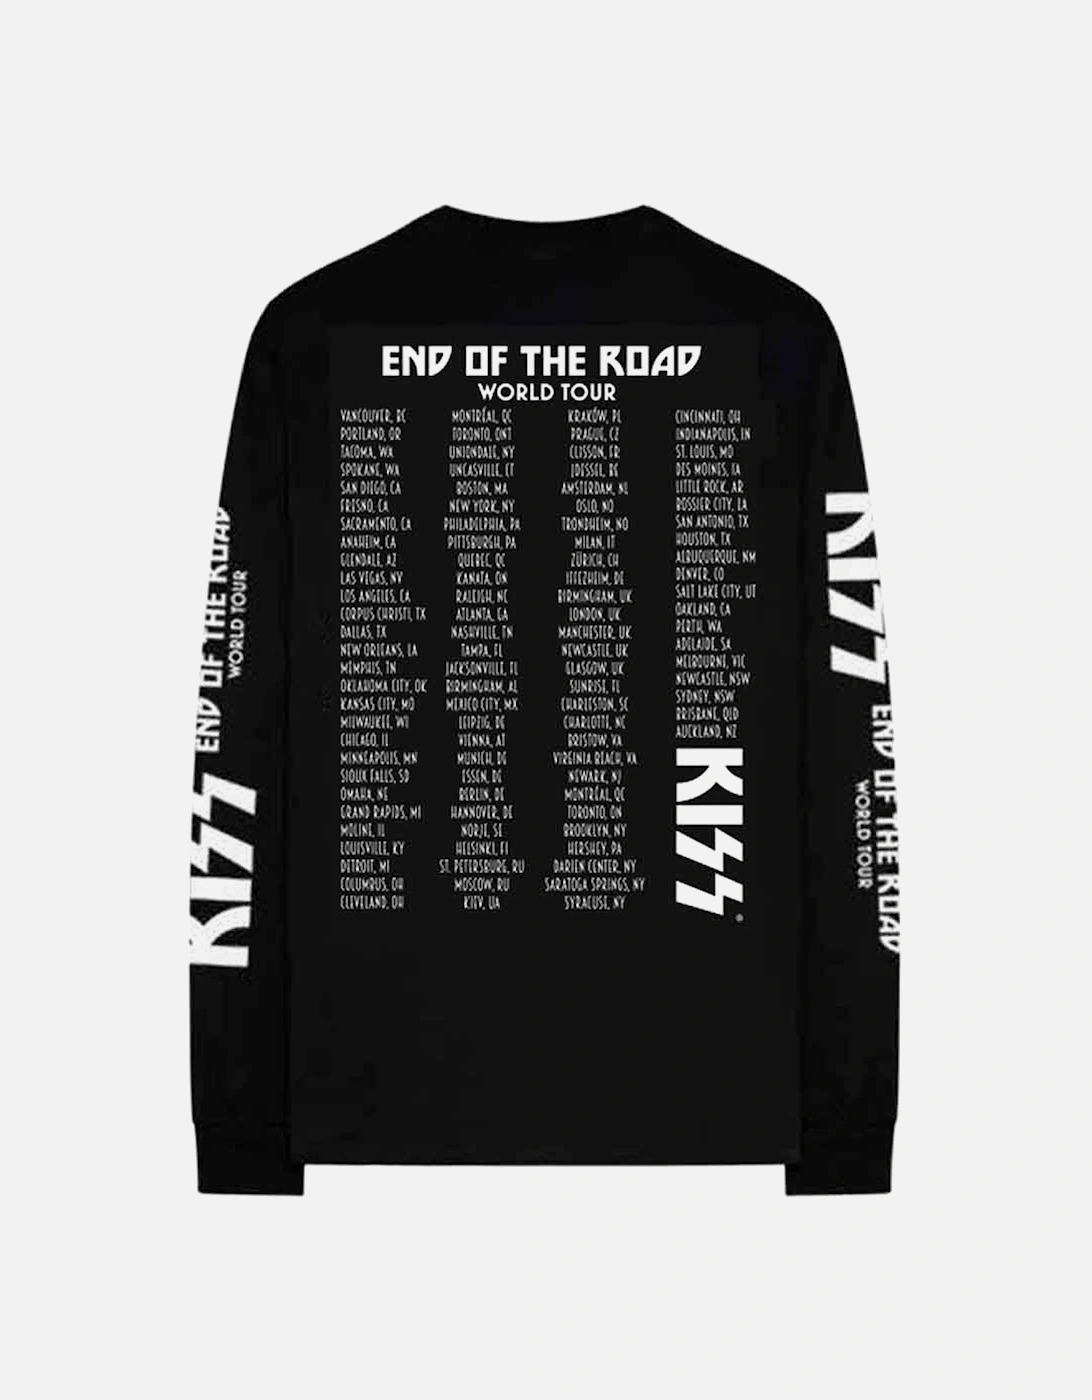 Unisex Adult End Of The Road Tour Long-Sleeved T-Shirt